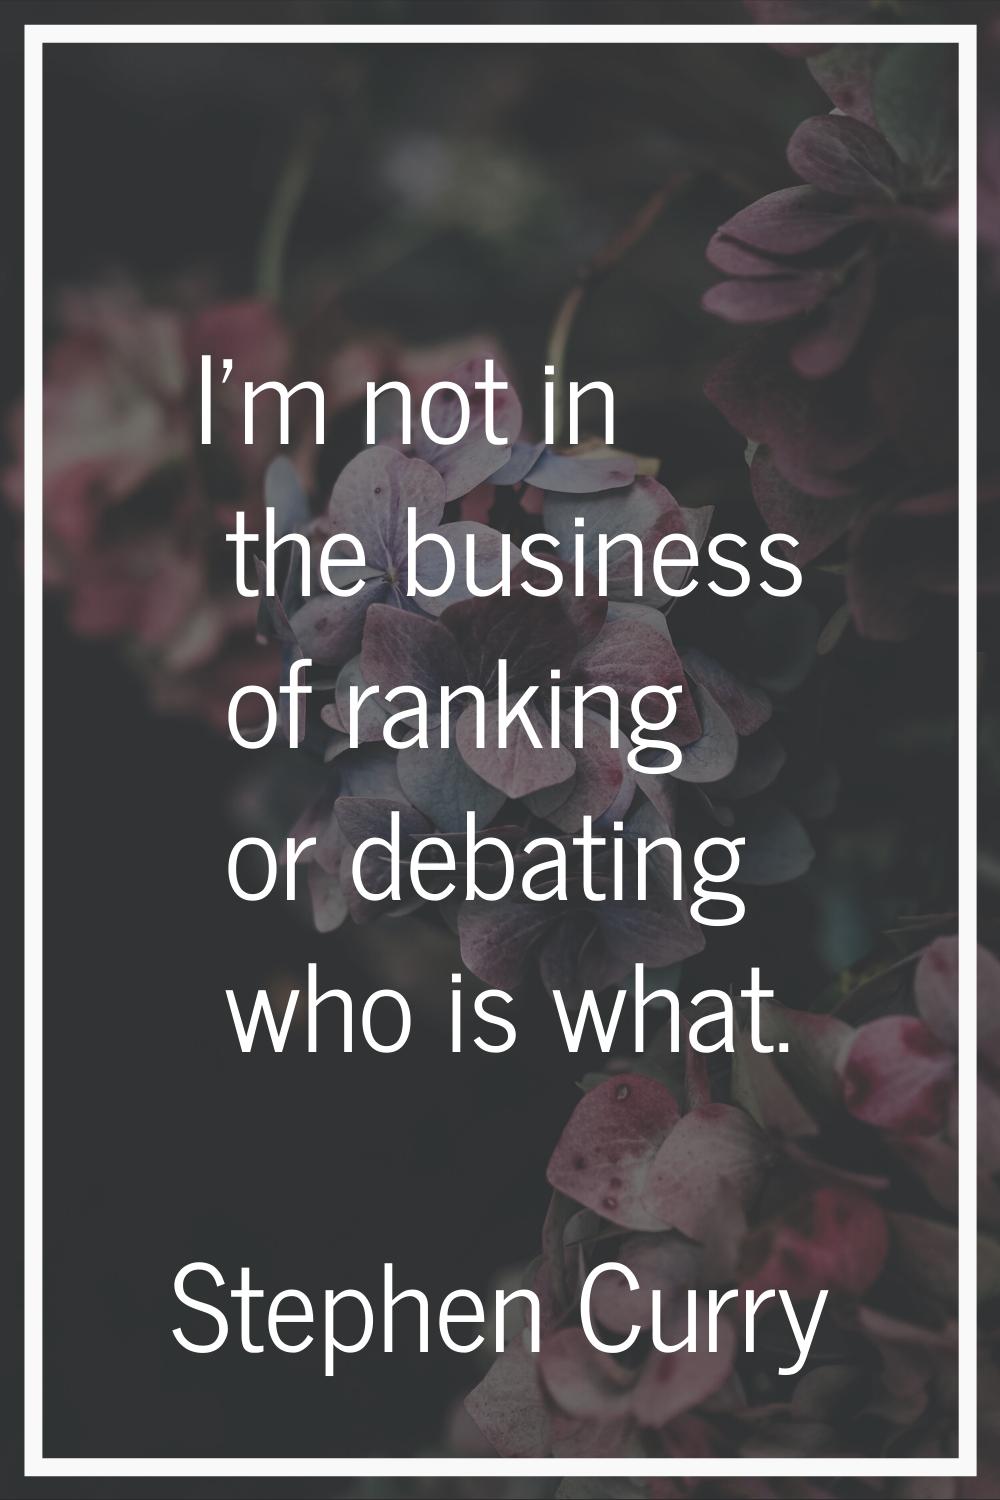 I'm not in the business of ranking or debating who is what.